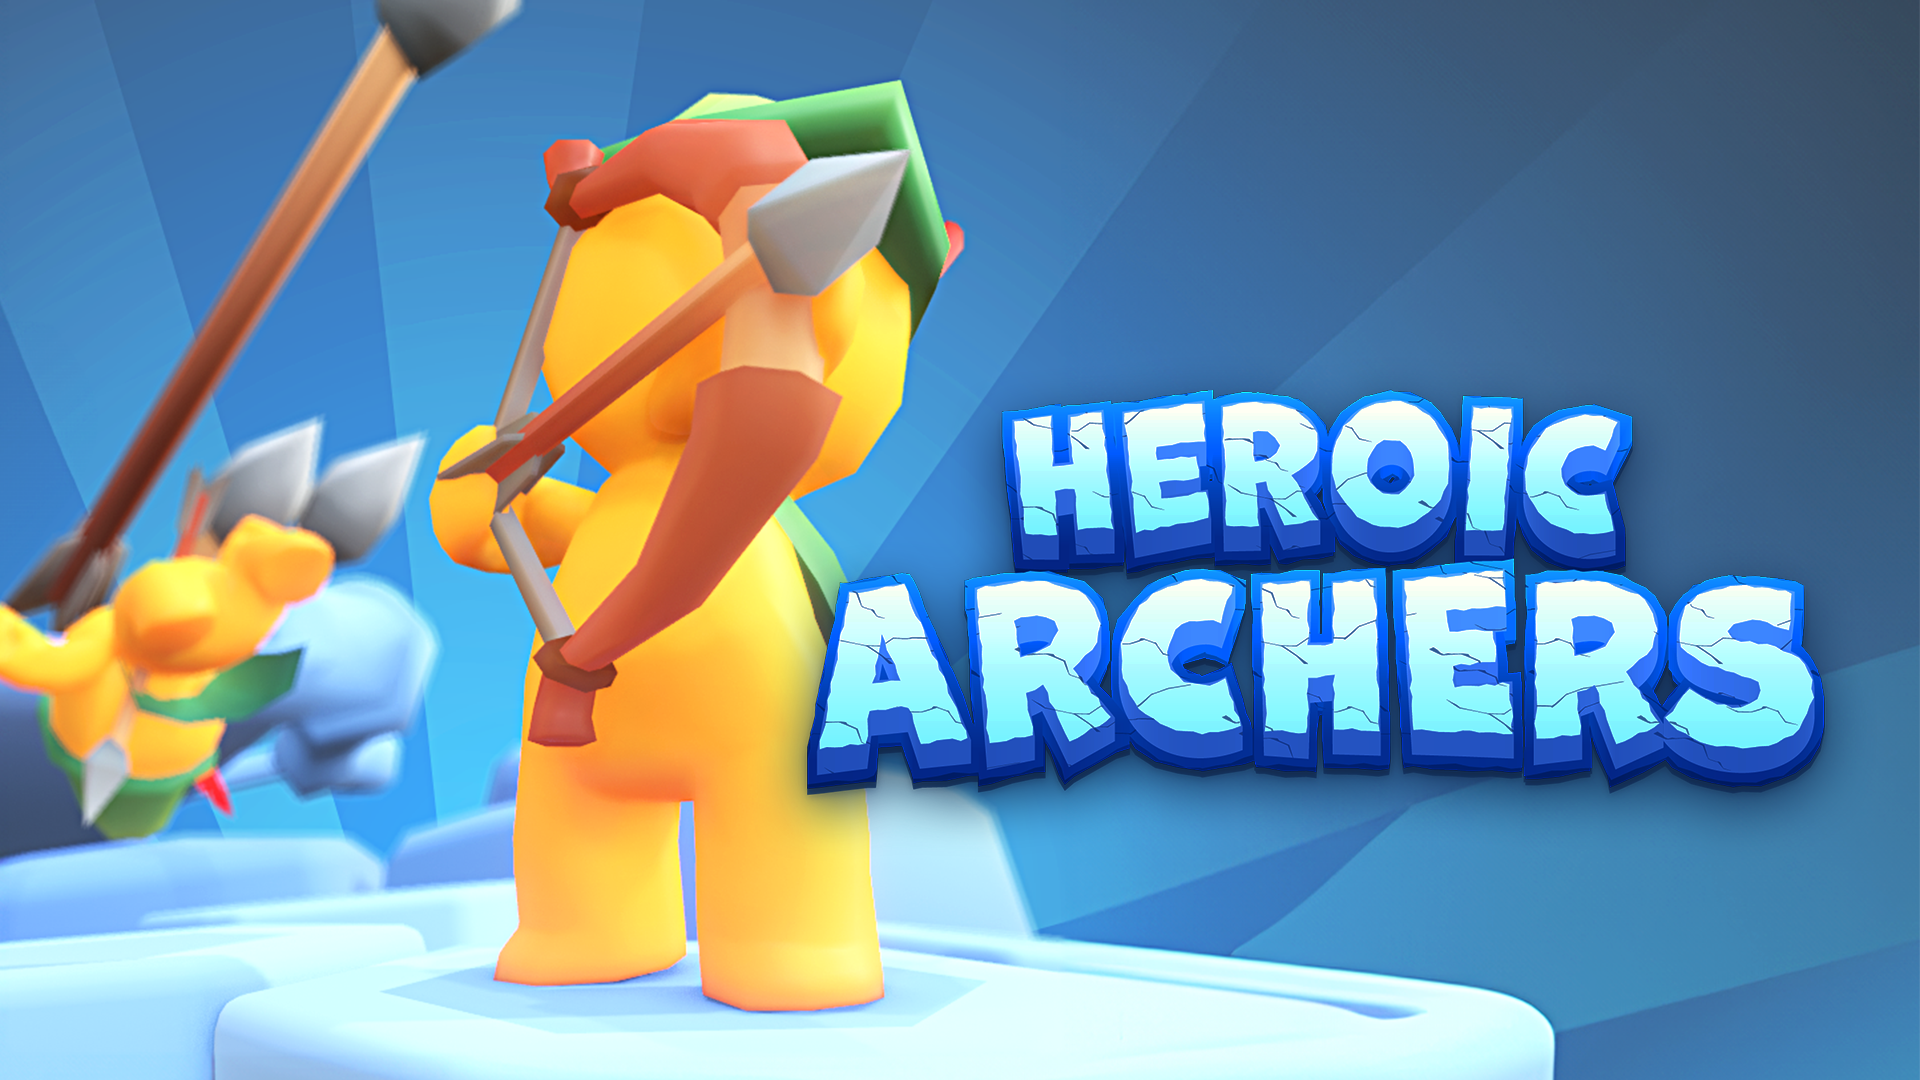 Heroic Archer Game Image